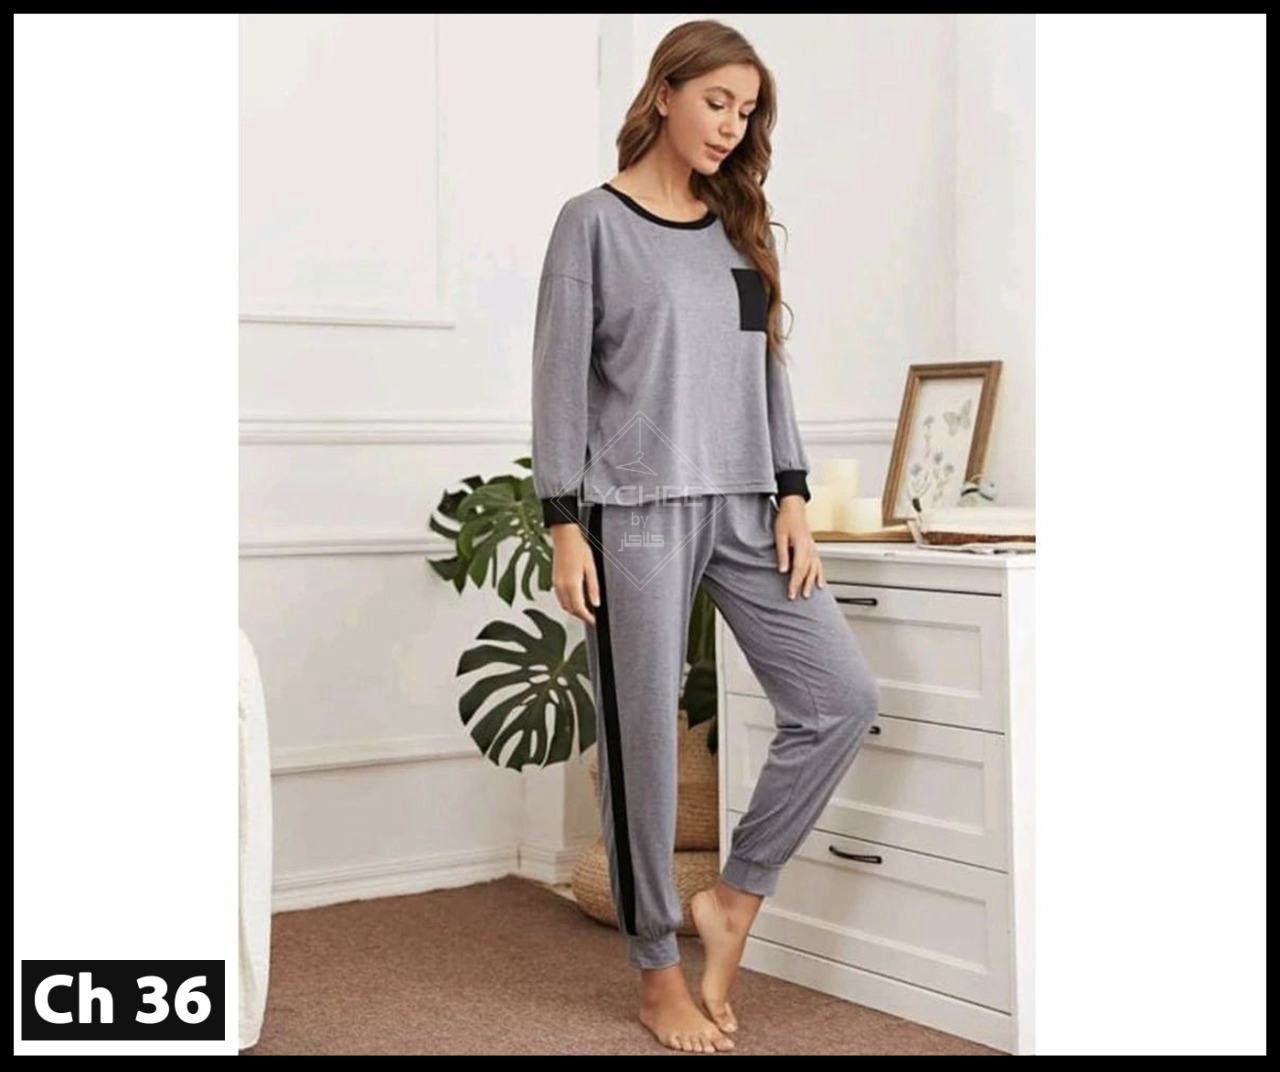 New Collection Grayish Home Wear Best For Summer seasons supper comfortable pajama set nightwear by Lychee